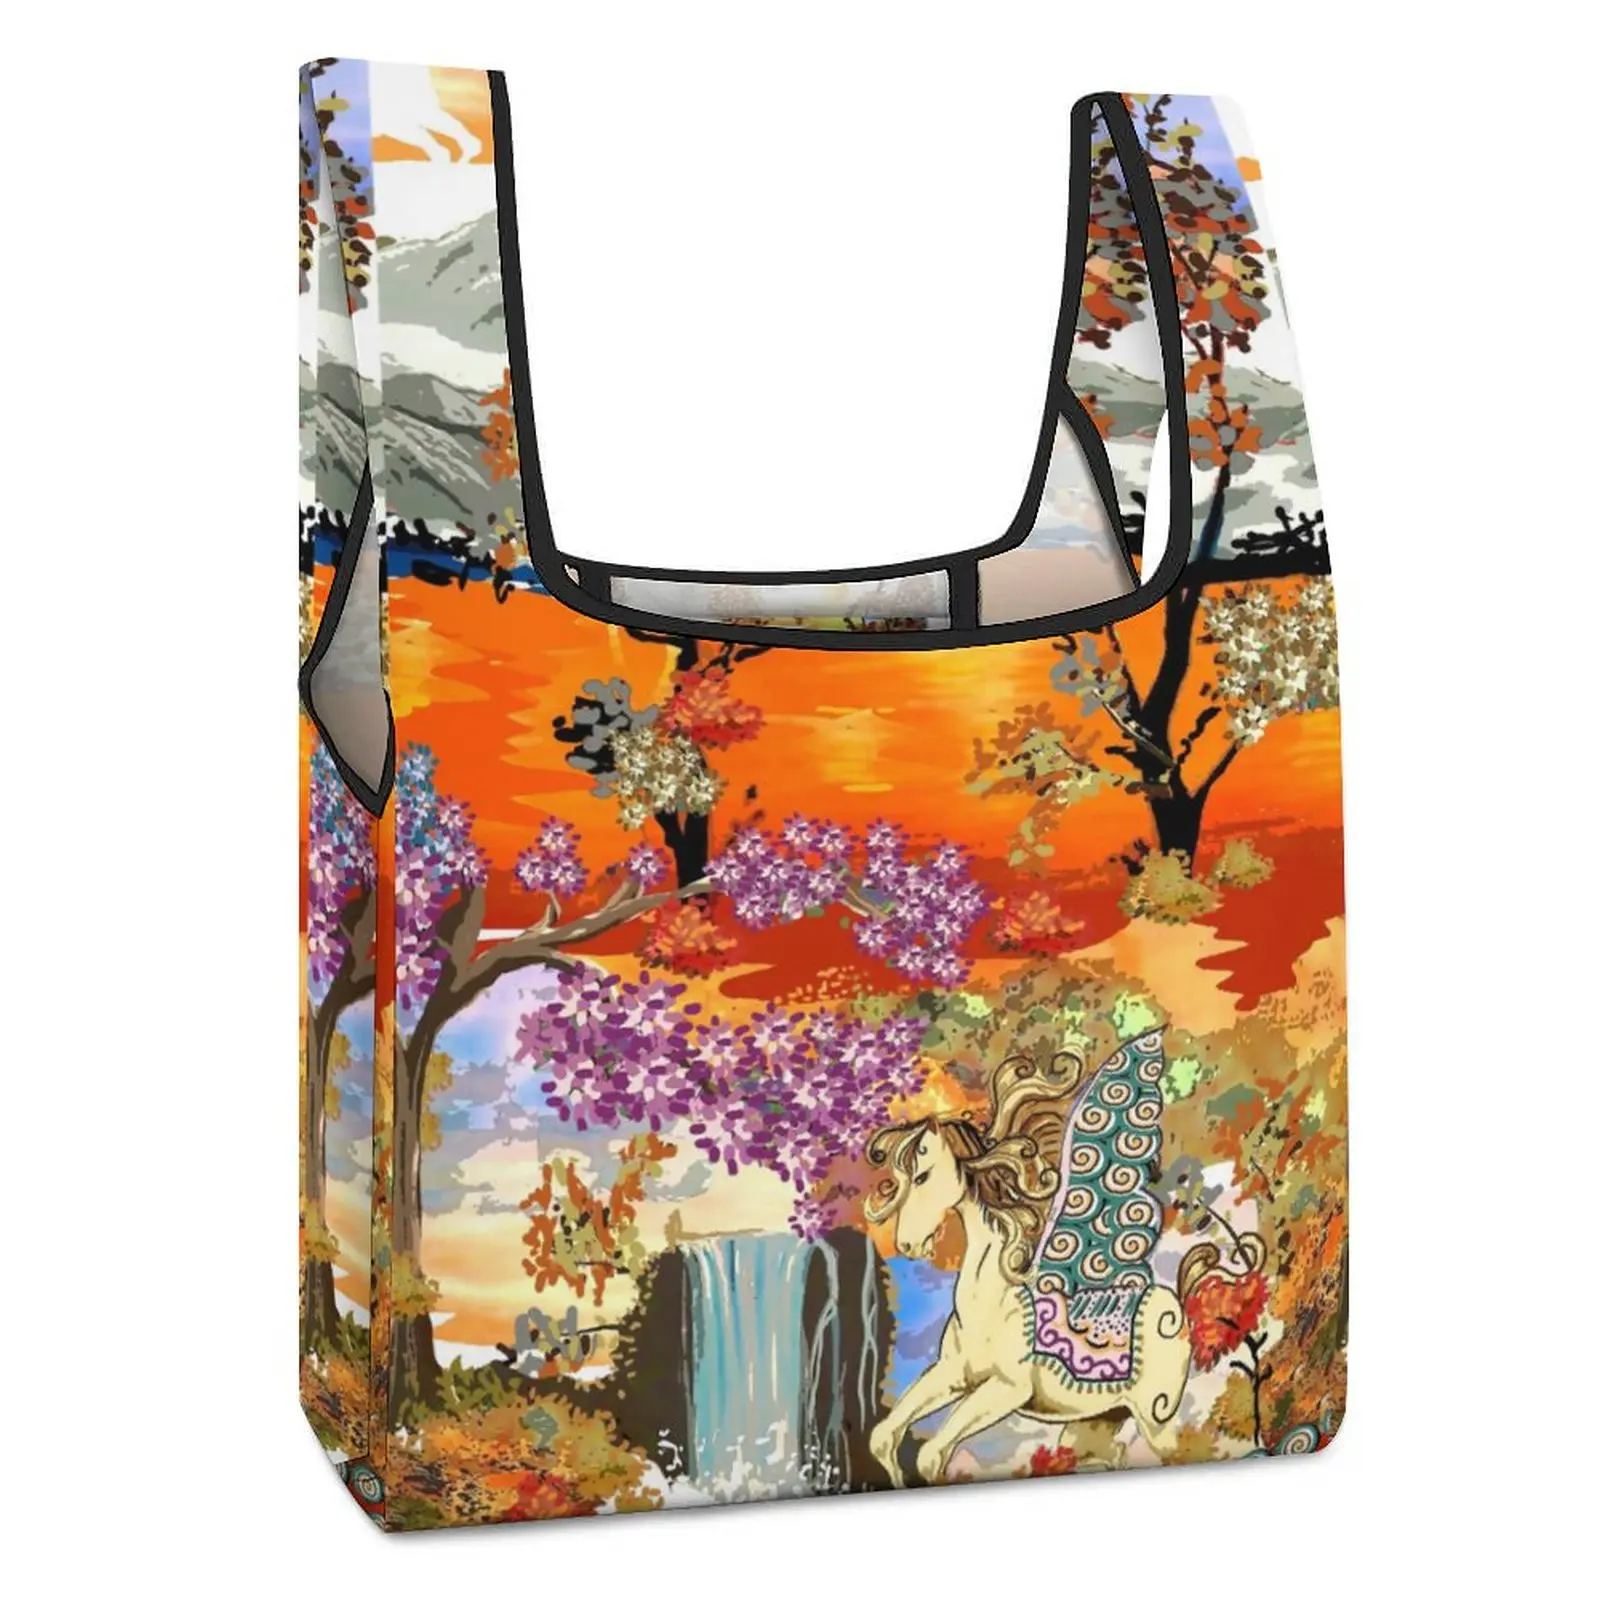 Customized Printed Collapsible Shopping Bag Double Strap Handbag Colored Printing Tote Casual Woman Grocery Bag Custom Pattern customized printed collapsible shopping bag double strap handbag retro printing tote casual woman grocery bag custom pattern